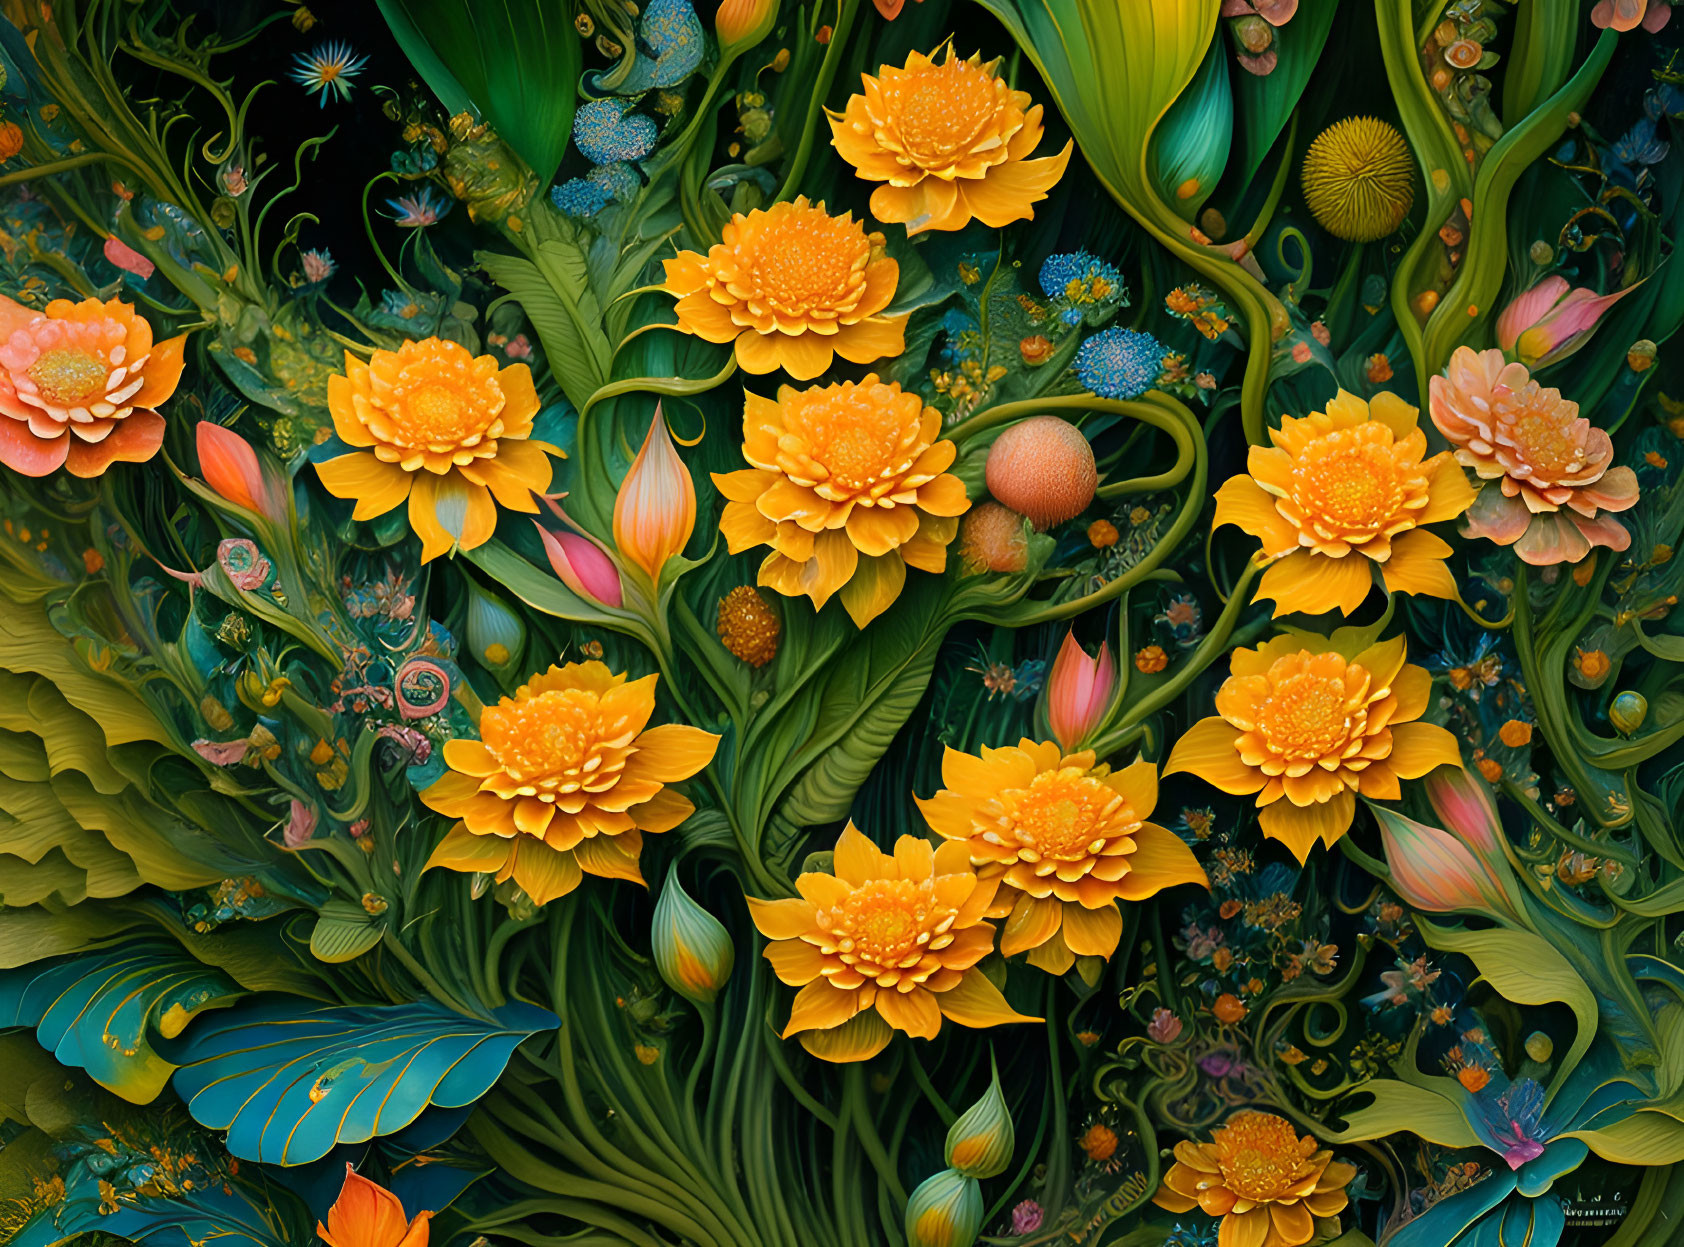 Colorful floral artwork with intricate patterns and hidden fauna in lush green backdrop